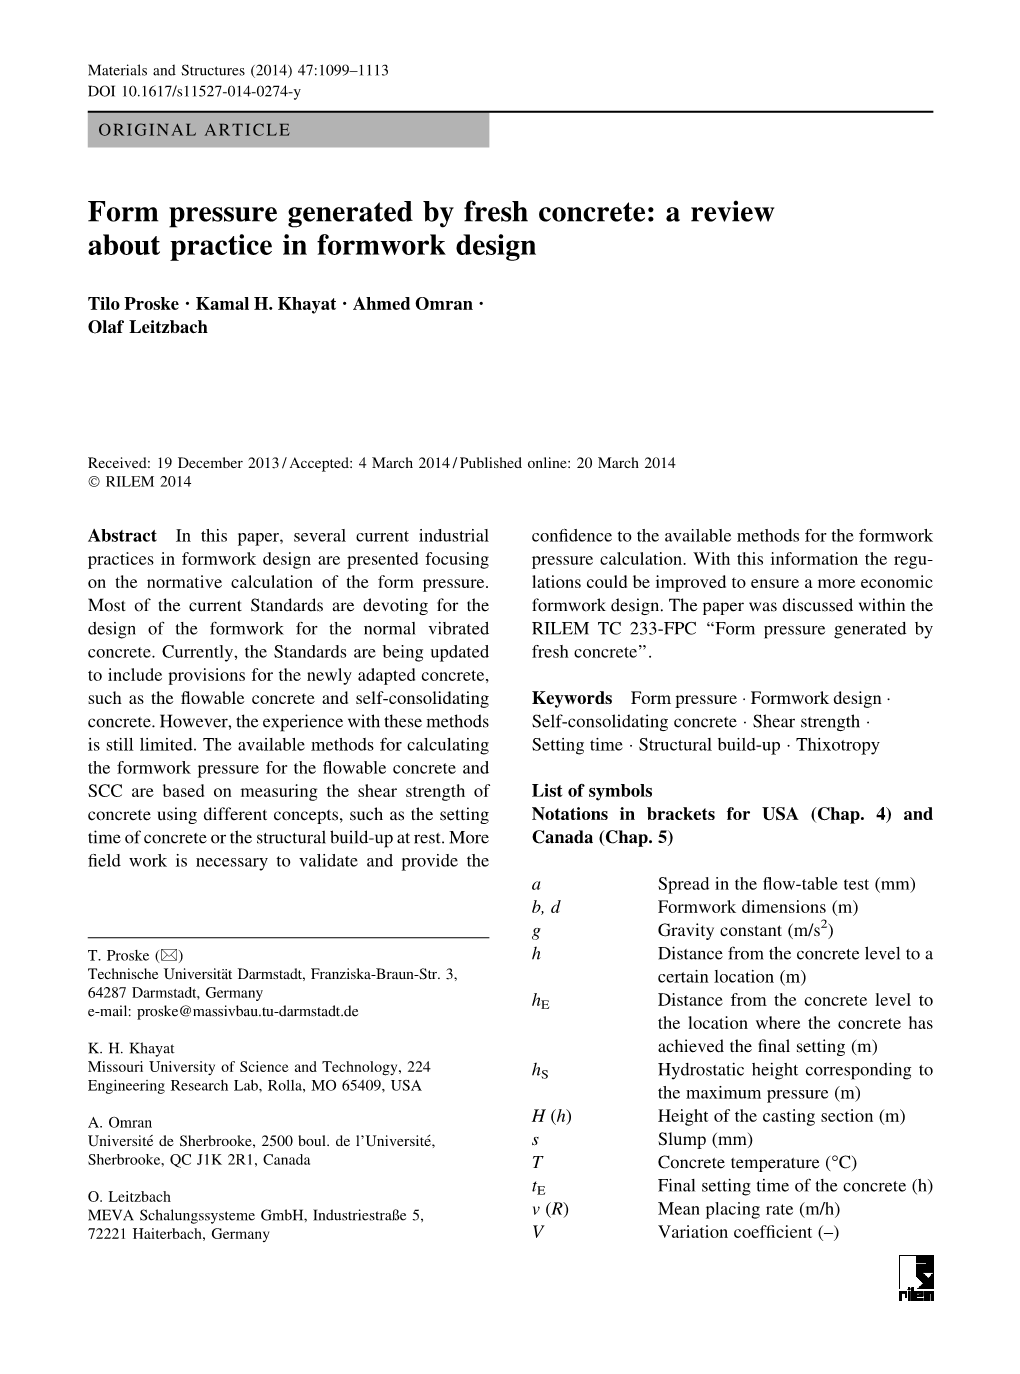 Form Pressure Generated by Fresh Concrete: a Review About Practice in Formwork Design